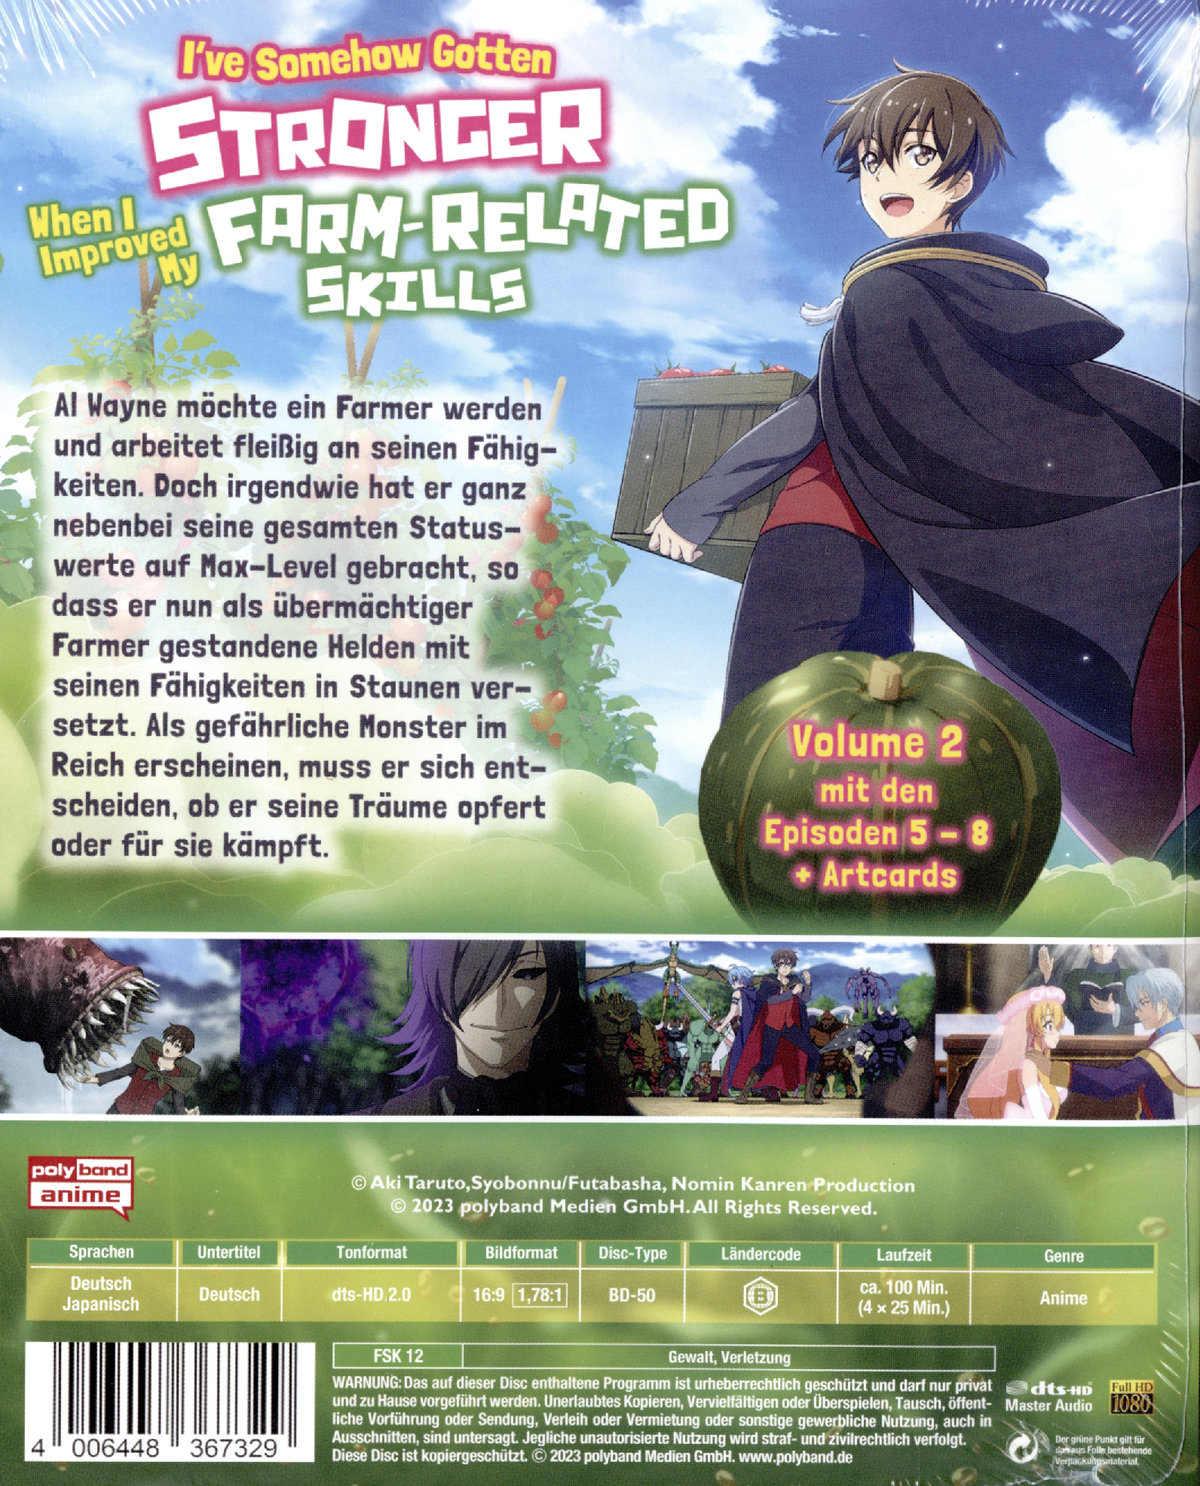 I’ve Somehow Gotten Stronger When I Improved My Farm-Related Skills - Volume 2  (Blu-ray Disc)